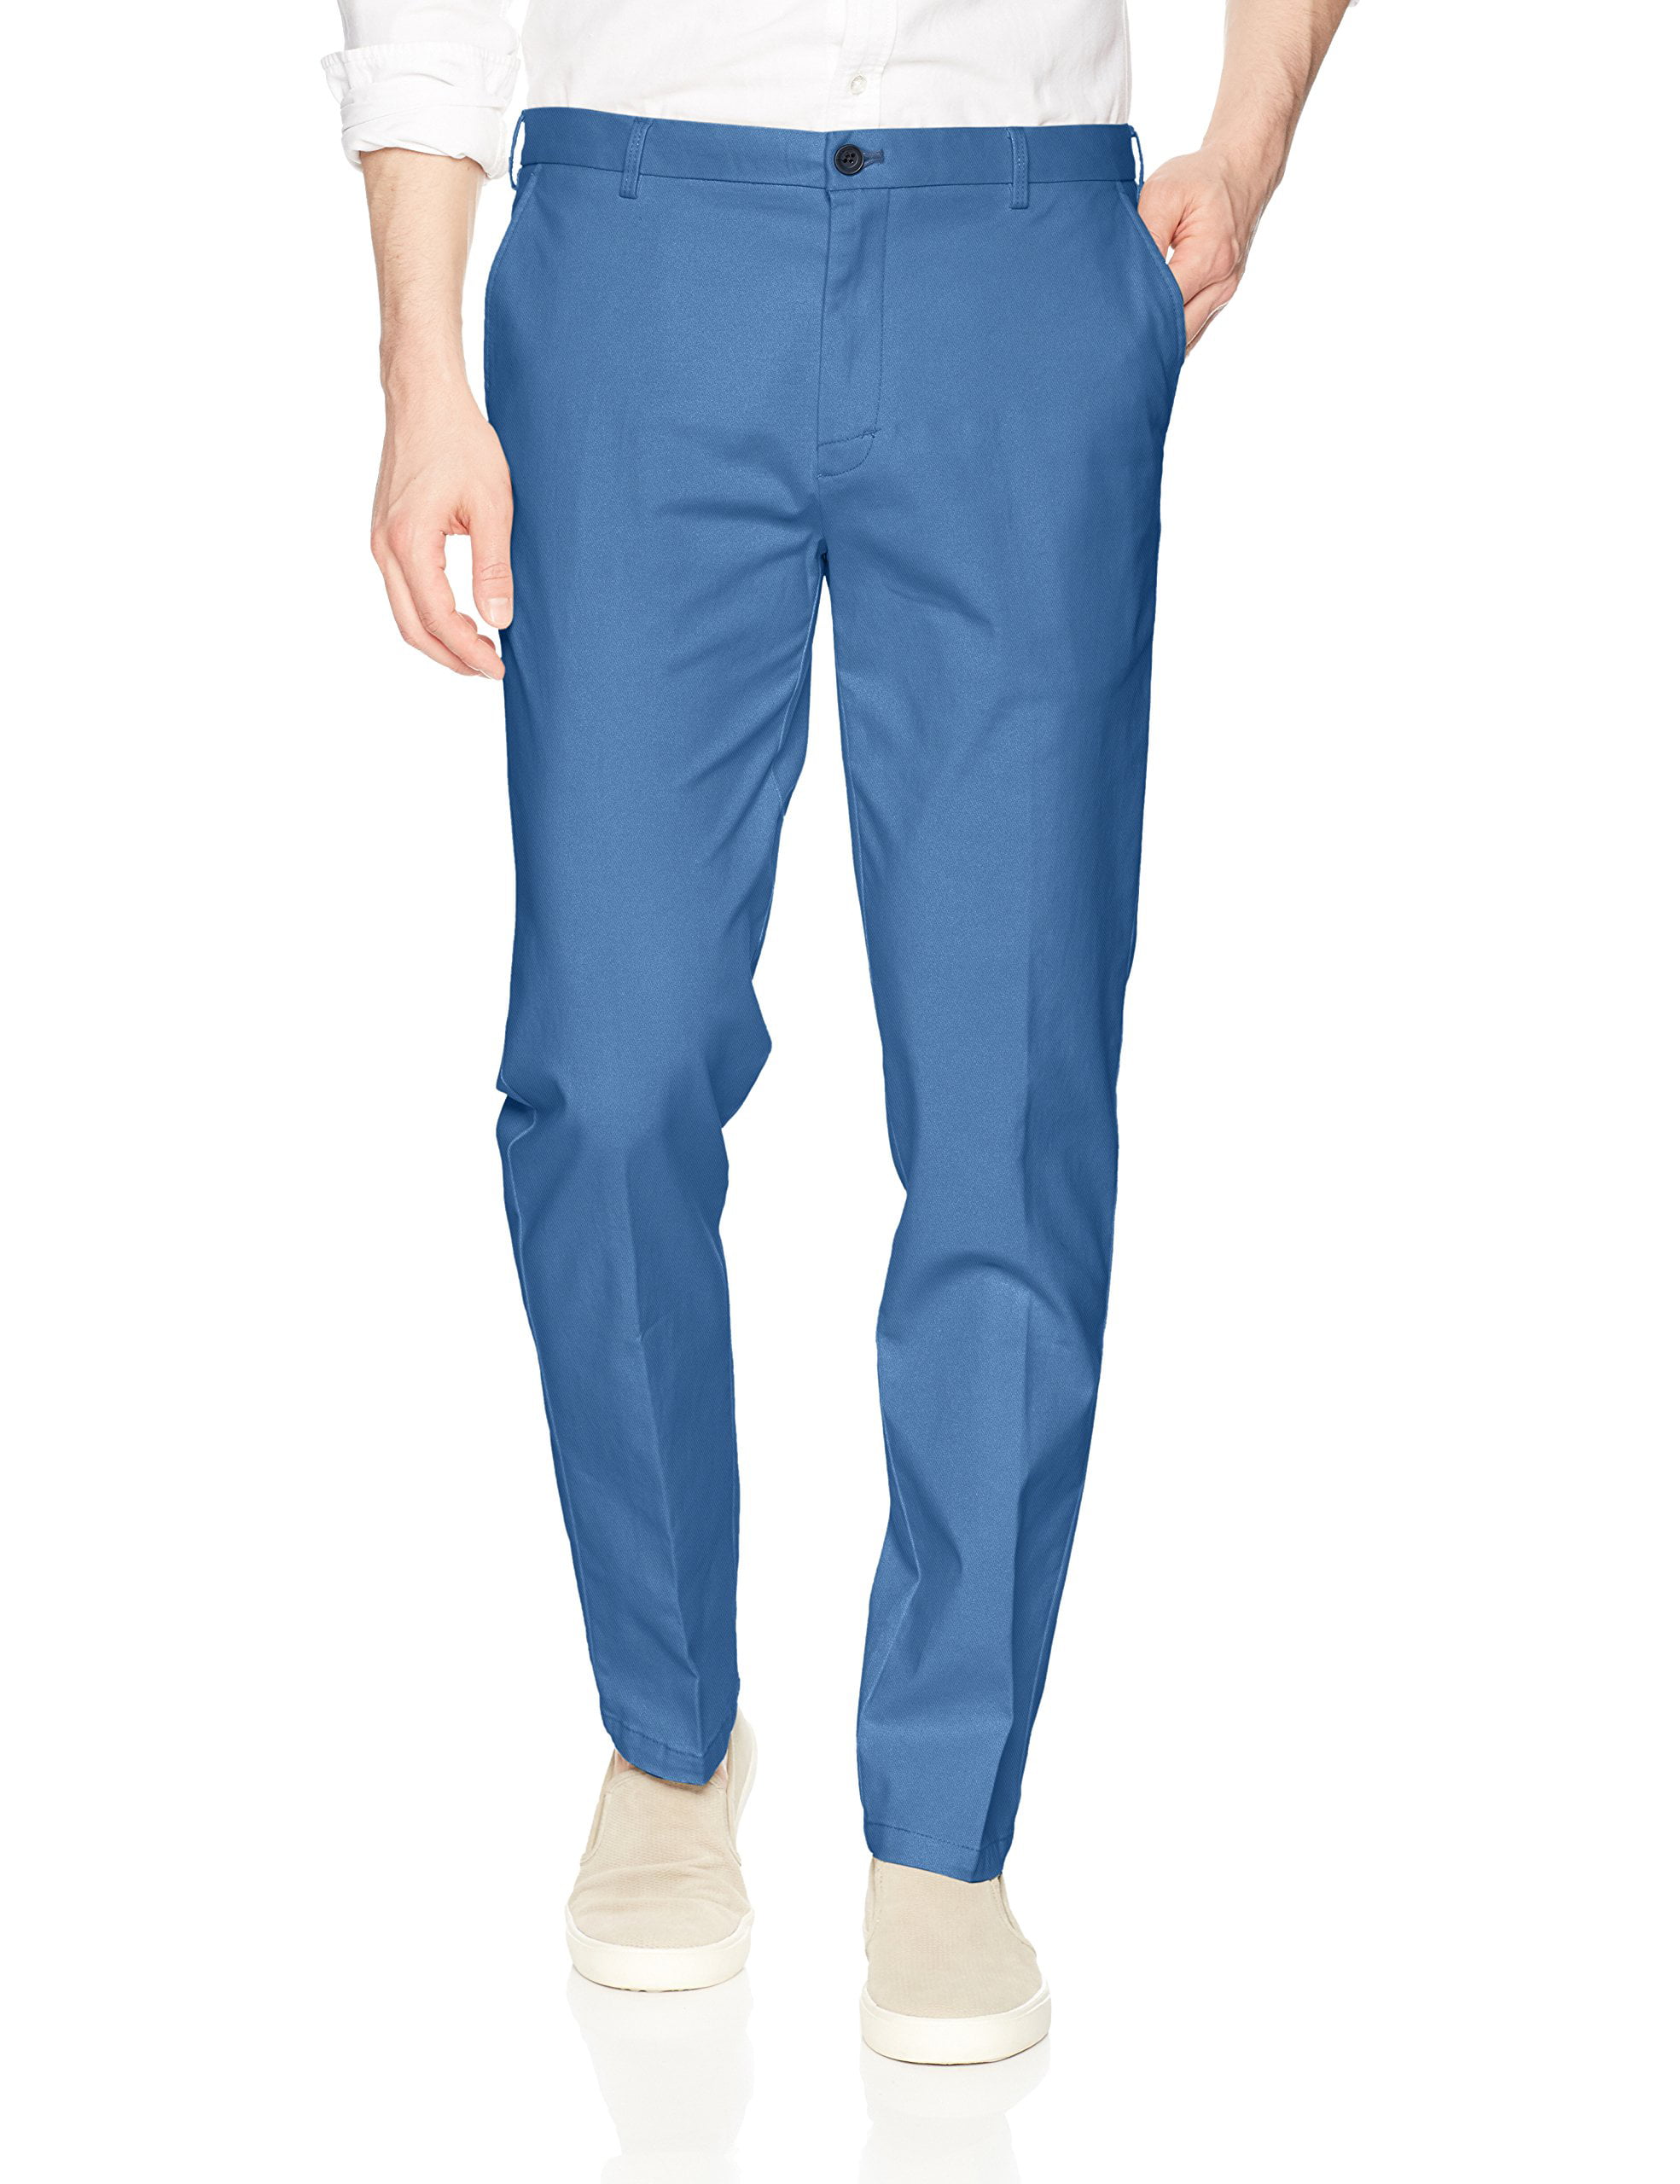 izod saltwater stretch straight fit flat front chino pant